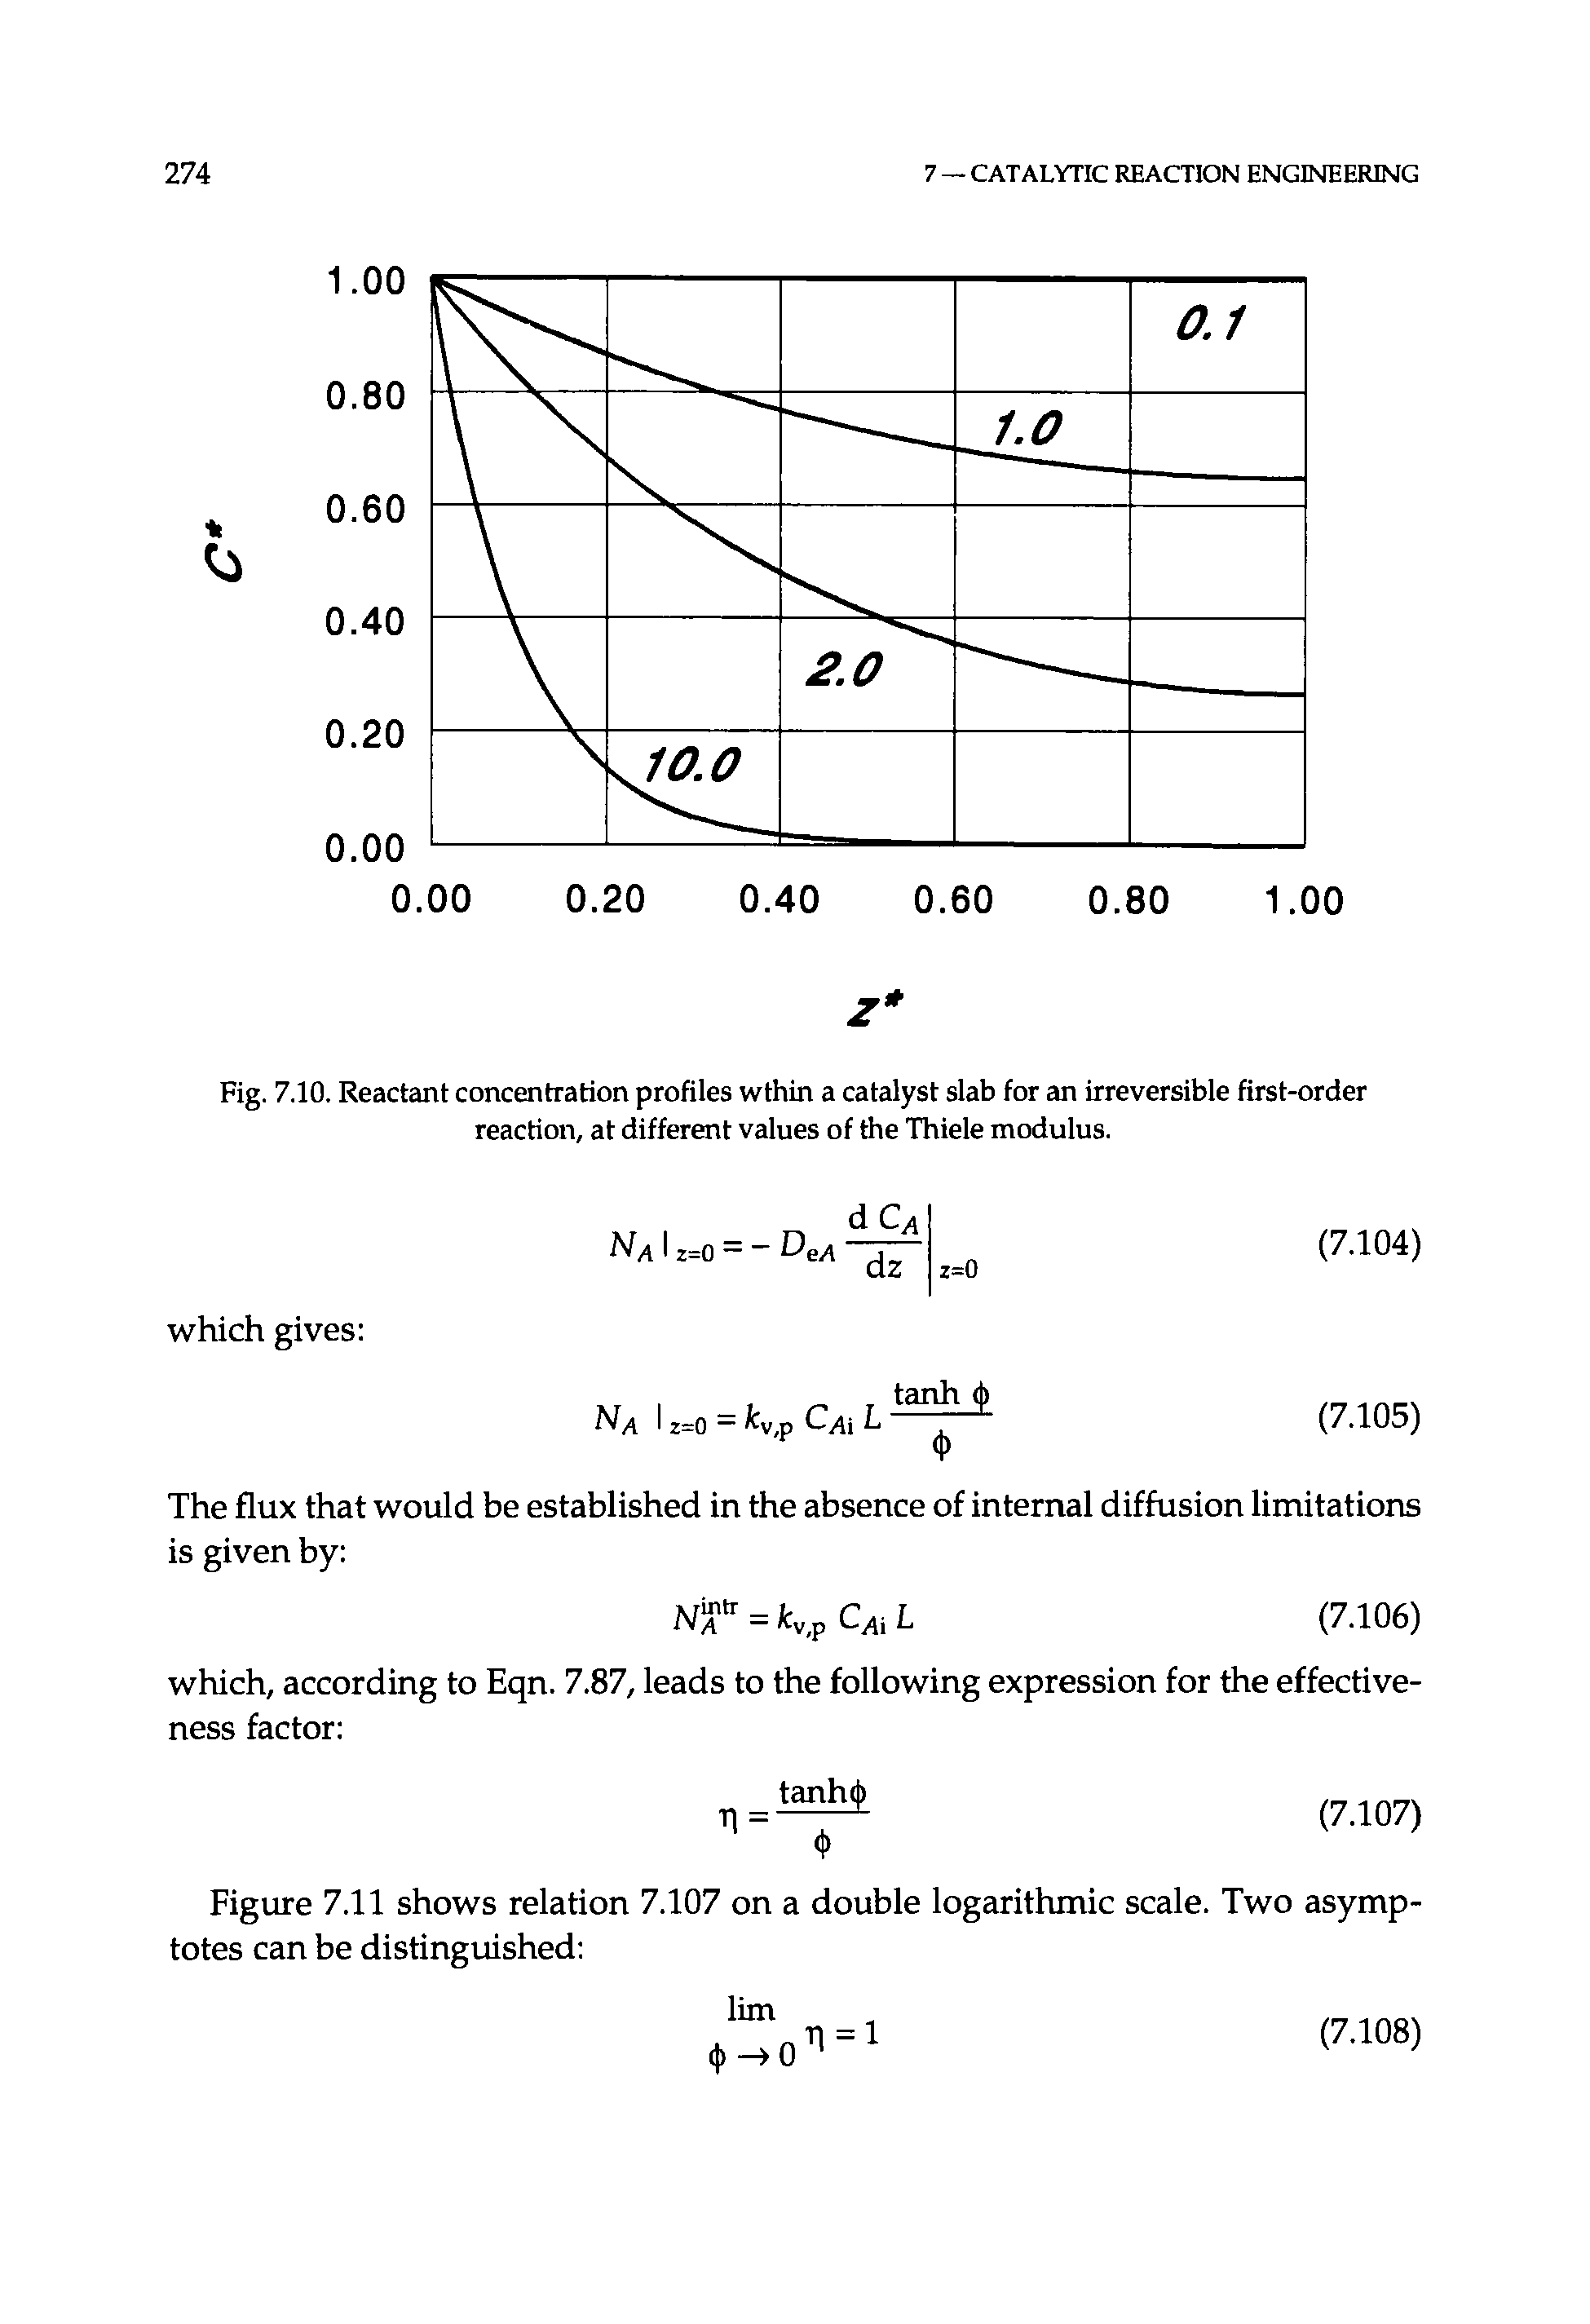 Fig. 7.10. Reactant concentration profiles wthin a catalyst slab for an irreversible first-order reaction, at different values of the Thiele modulus.